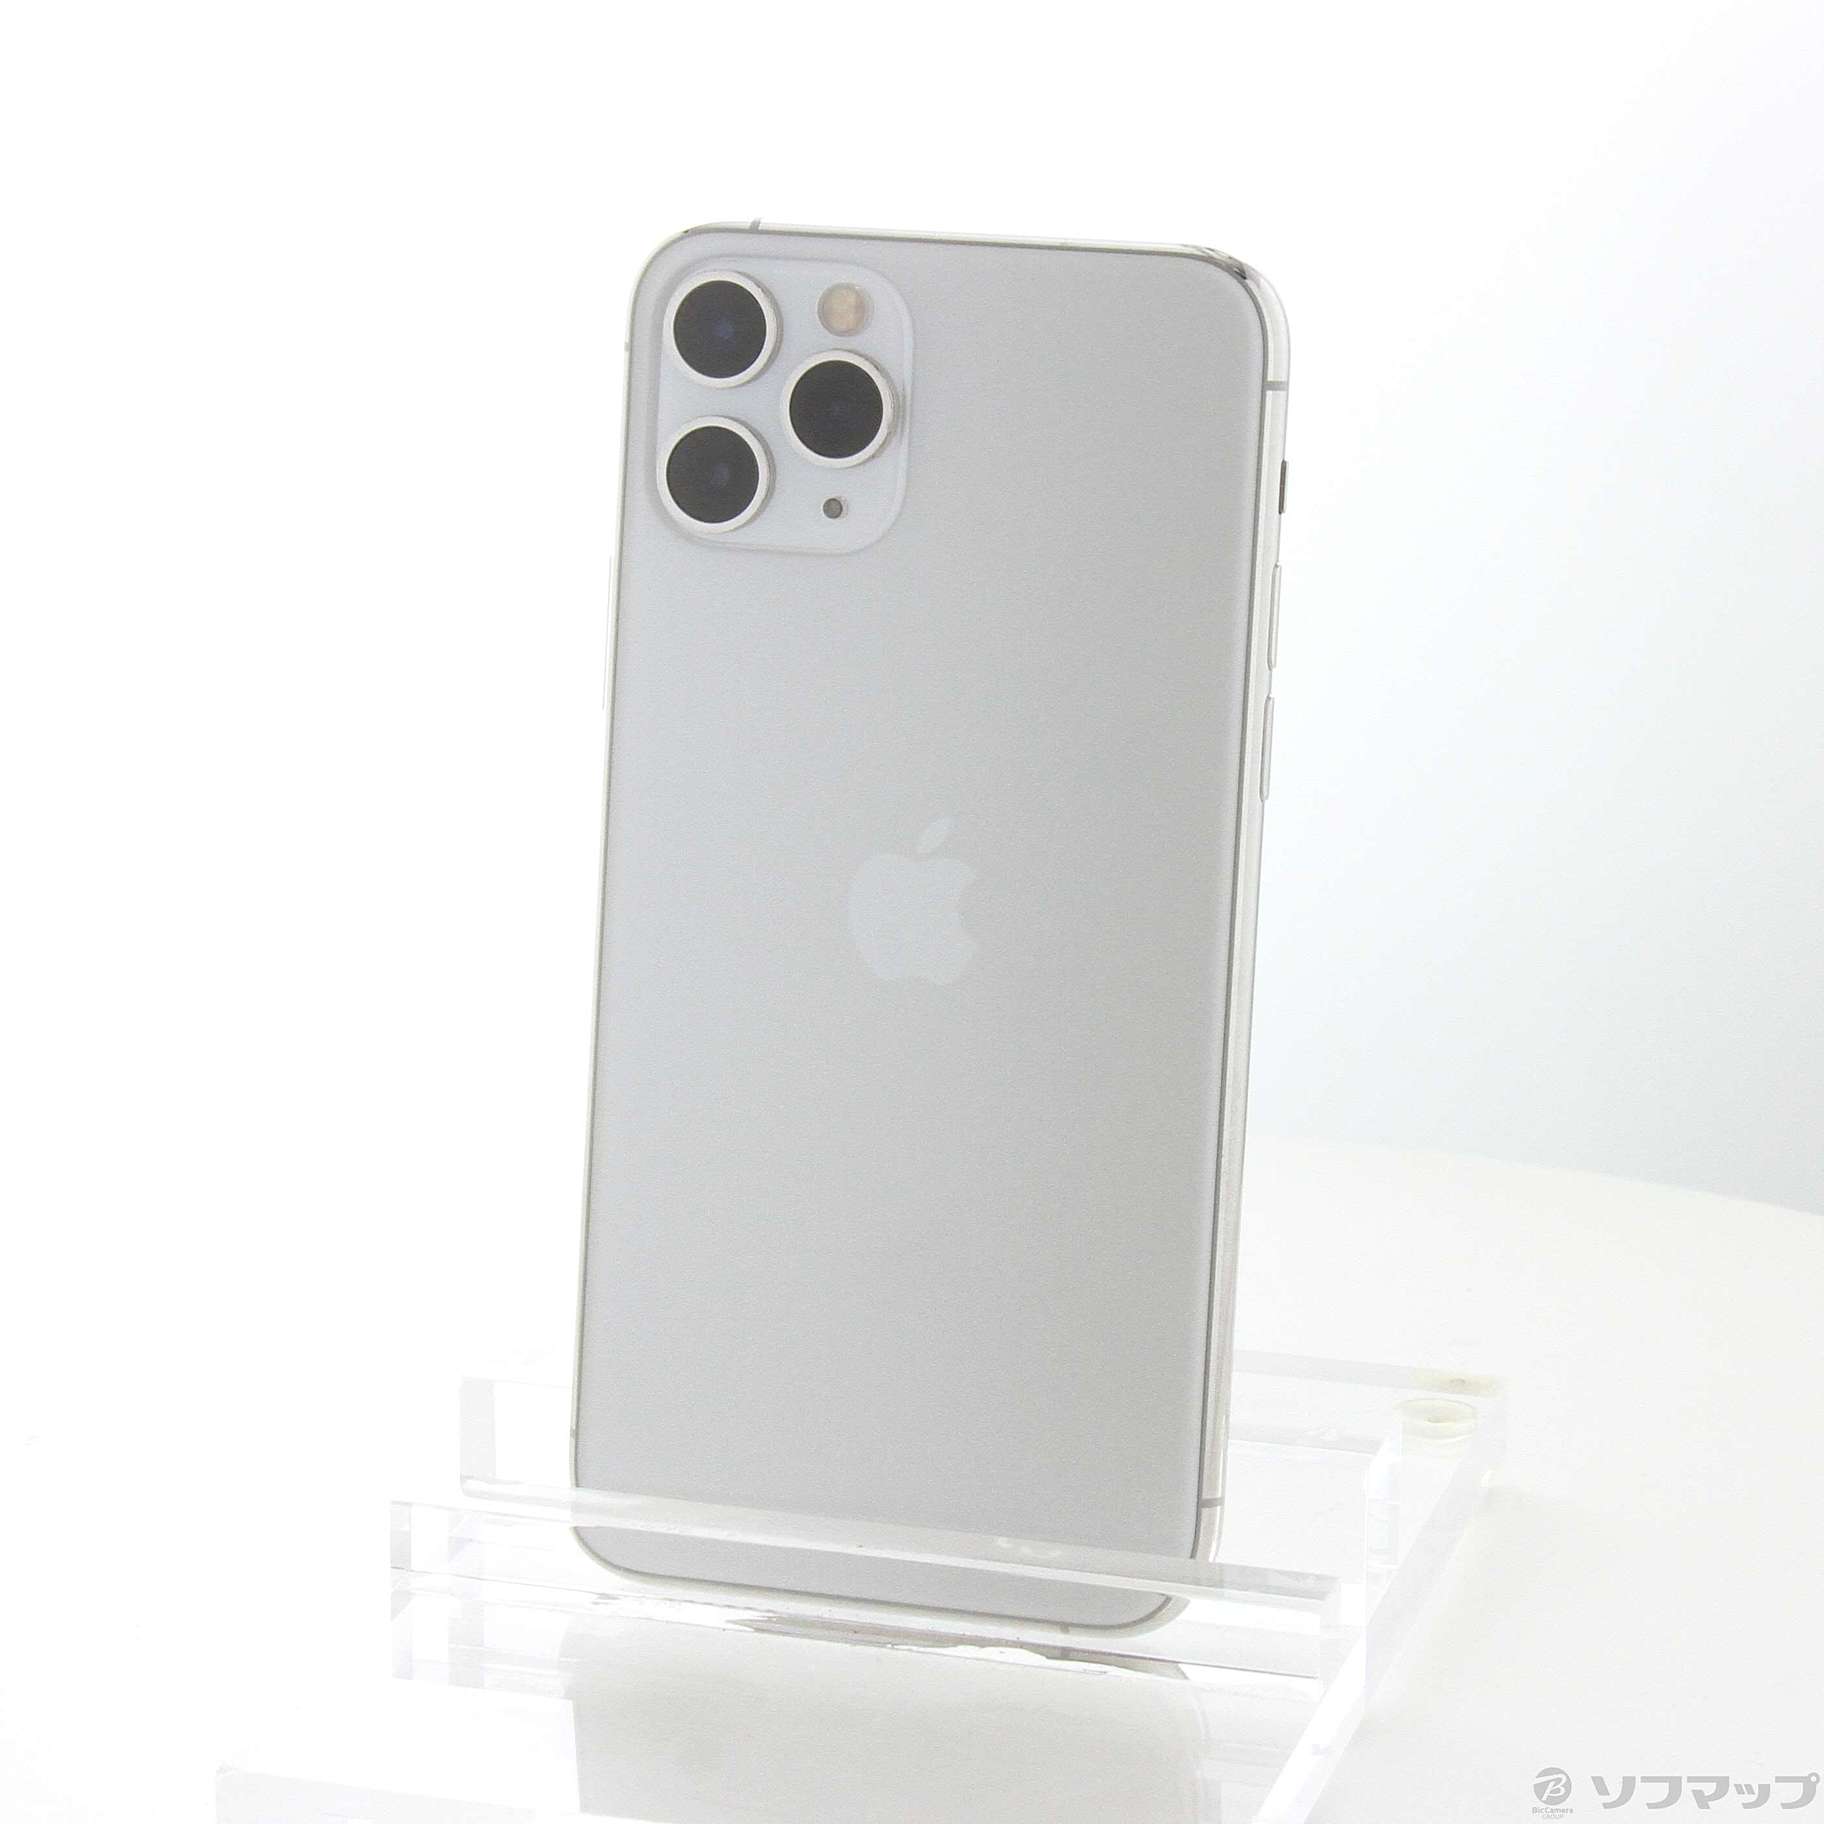 iPhone 11 Pro 256G silver SIMロック解除済み